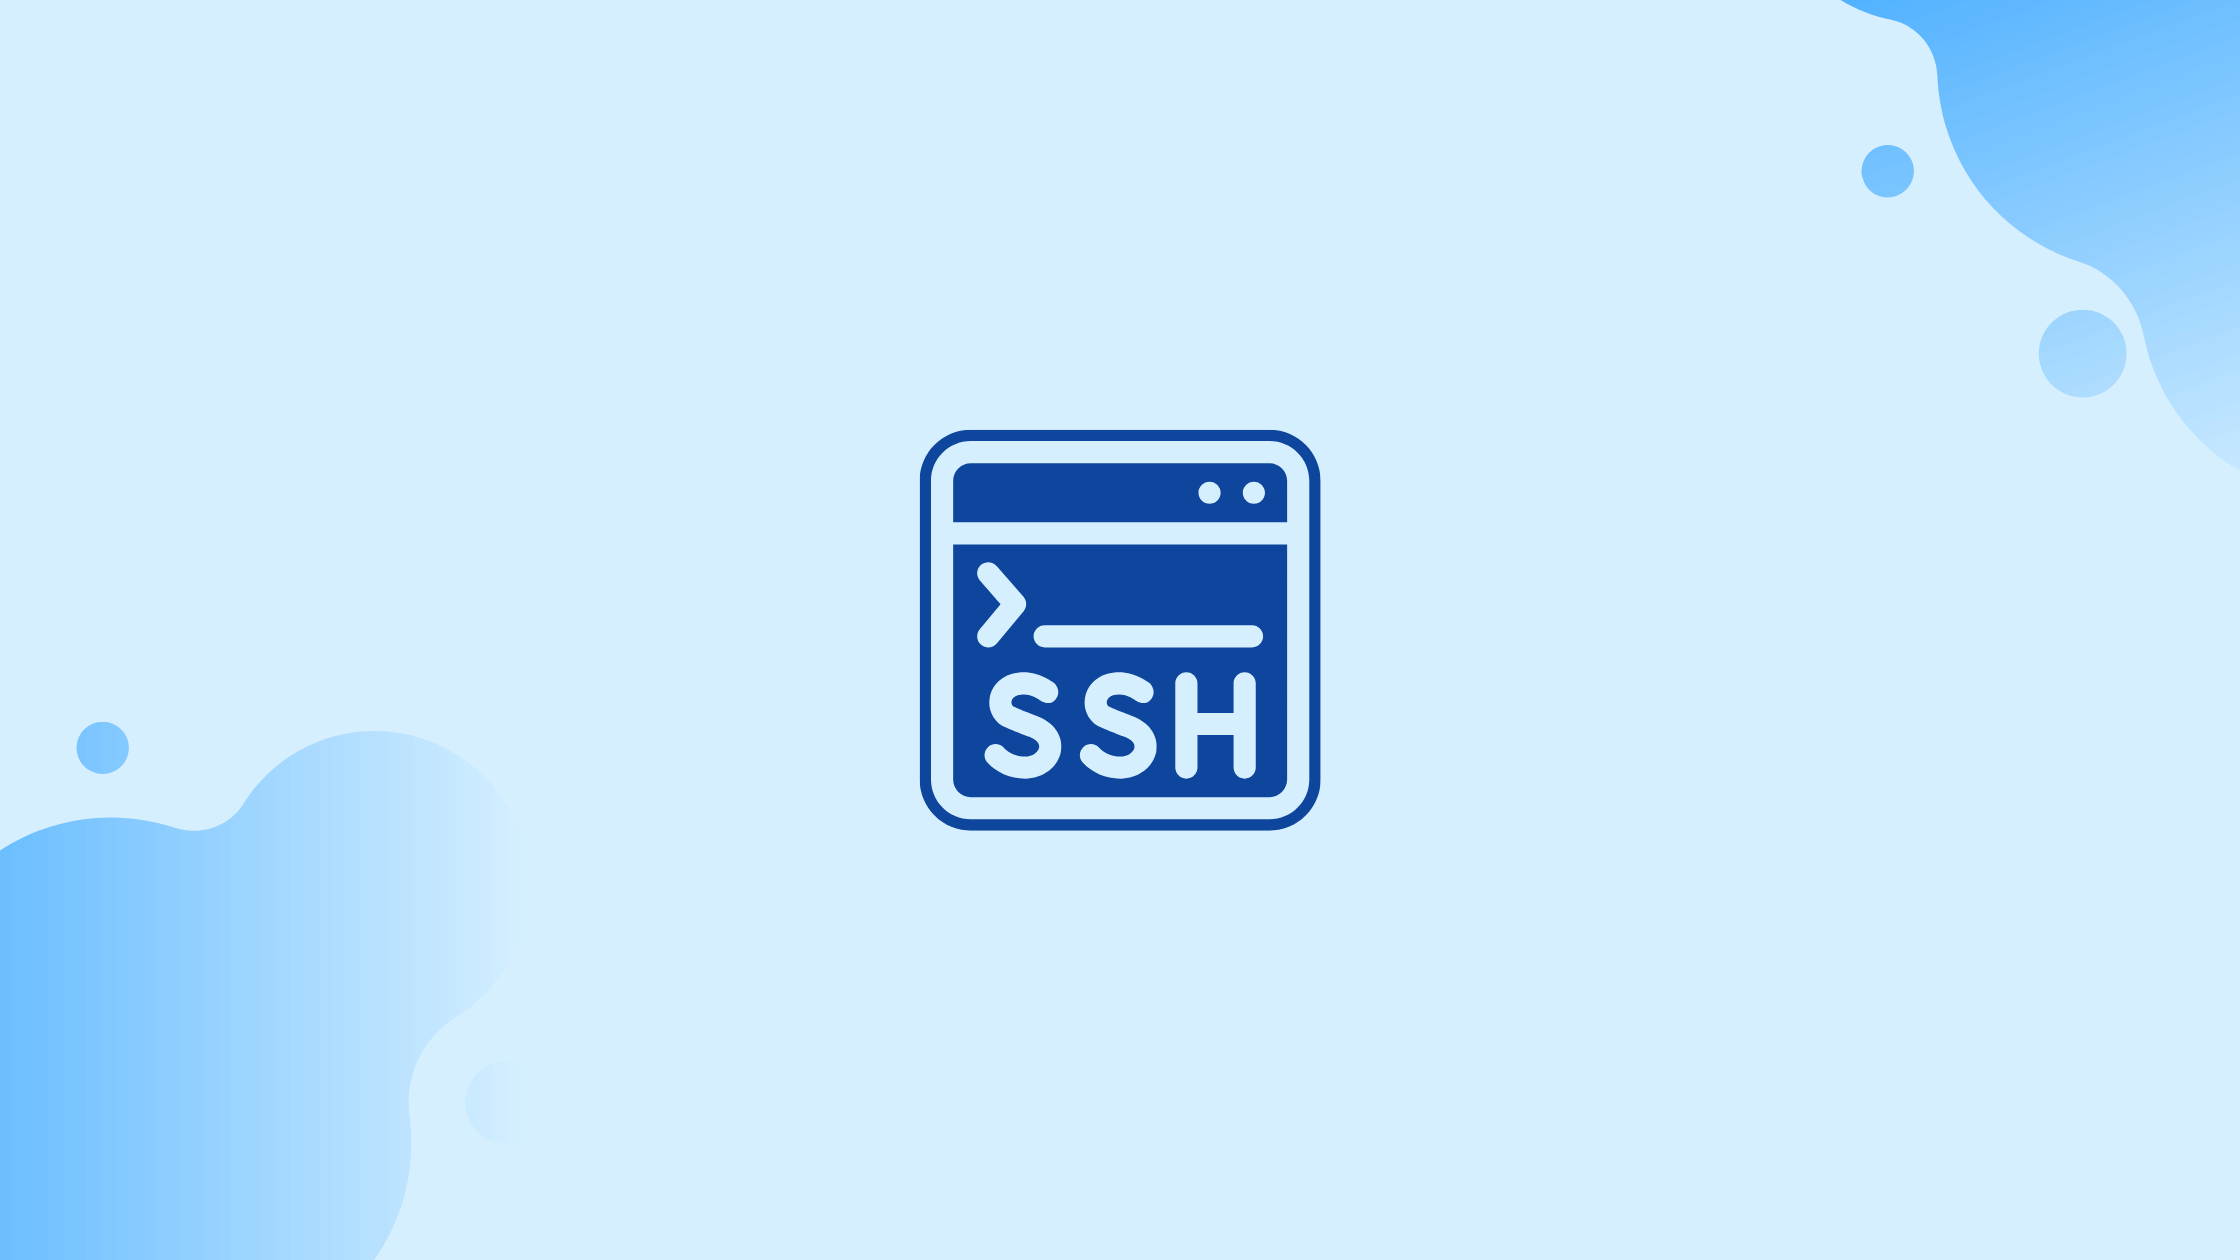 Use SSH Command with Password in Single Line